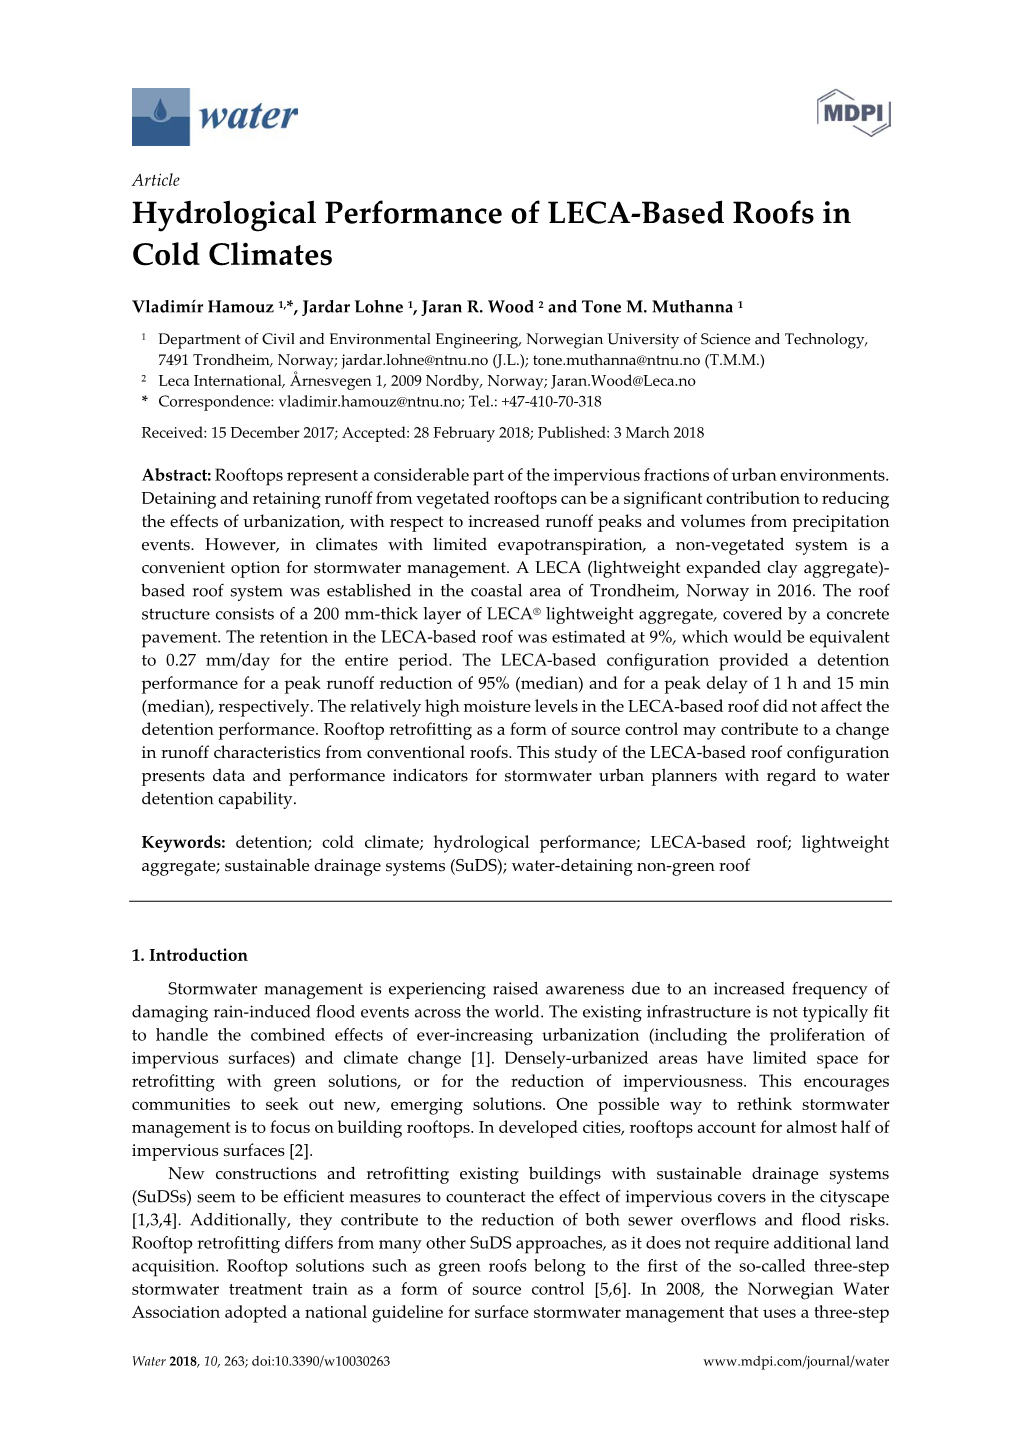 Article Hydrological Performance of LECA-Based Roofs in Cold Climates